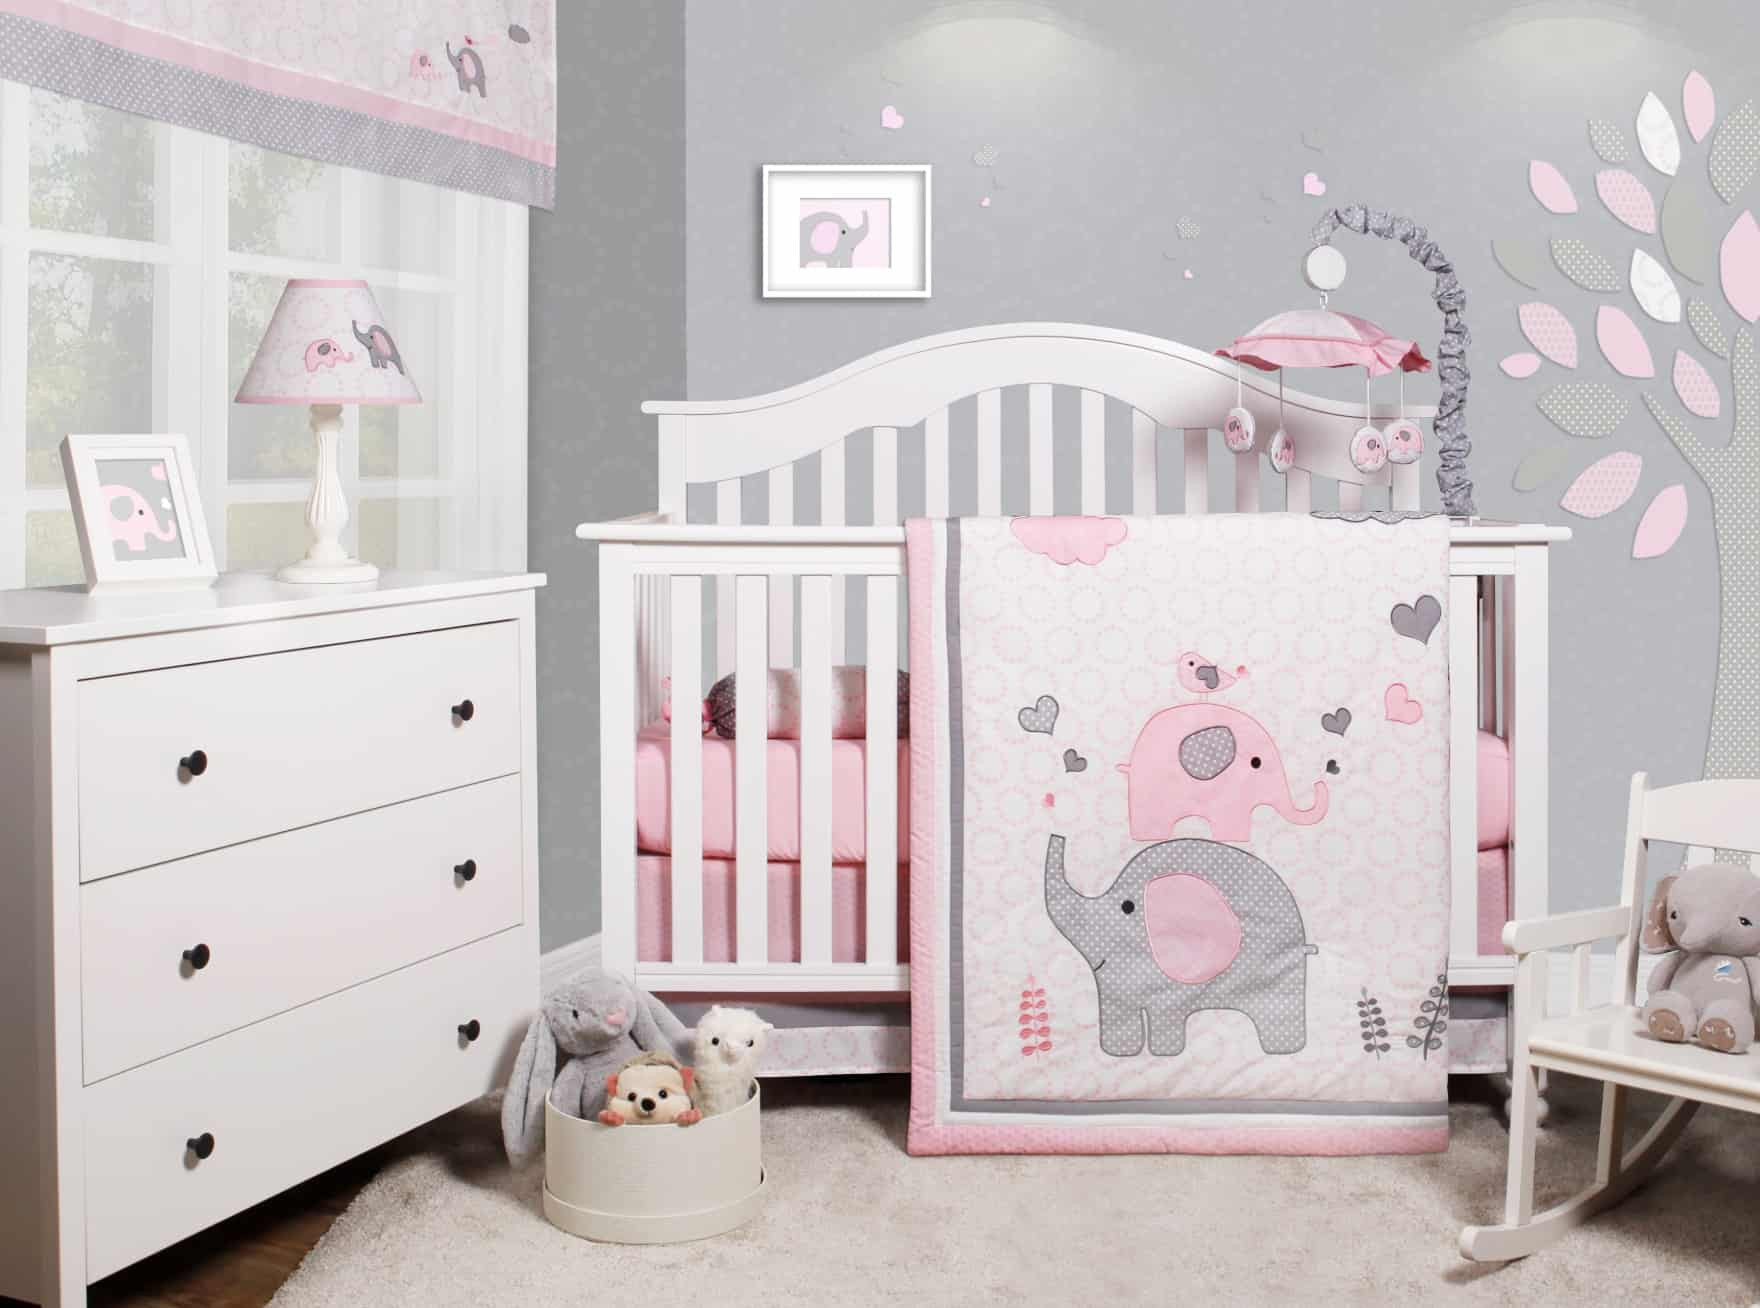 Baby Girl Room Decorations
 20 Cute Baby Girl Room Ideas